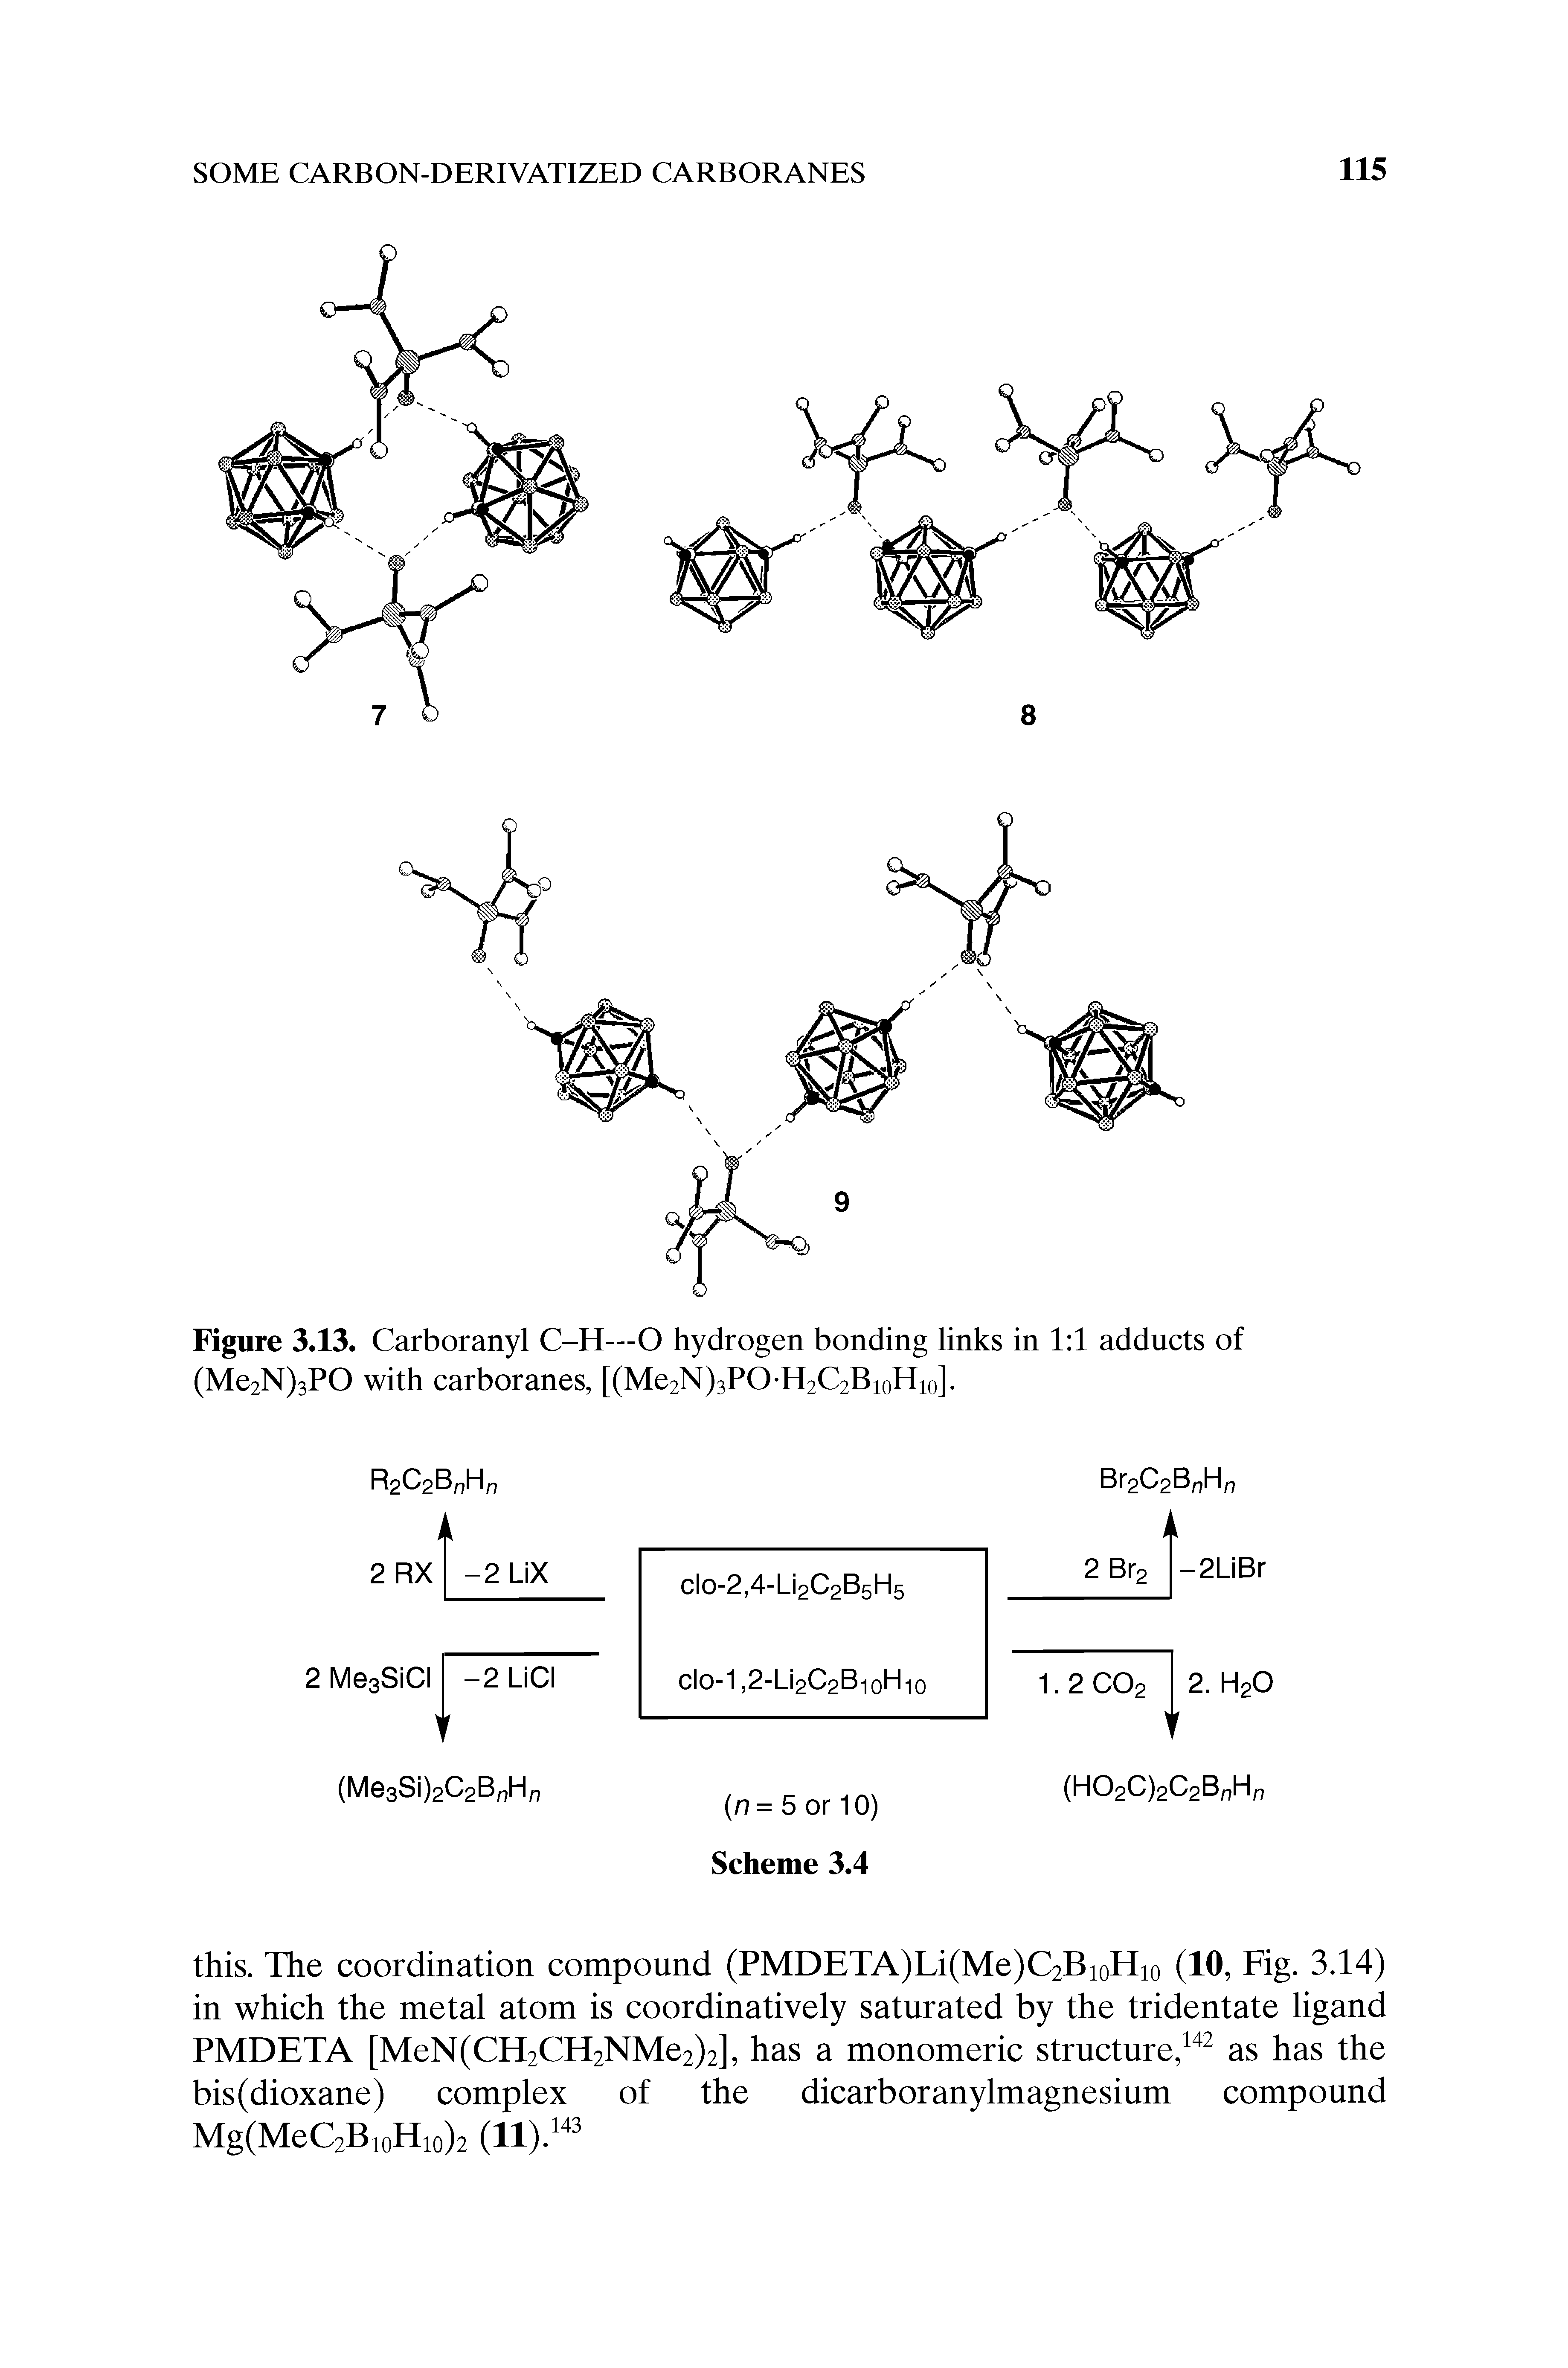 Figure 3.13. Carboranyl C-H—O hydrogen bonding links in 1 1 adducts of (Me2N)3PO with carboranes, [(Me2N)3PO H2C2BioHio].